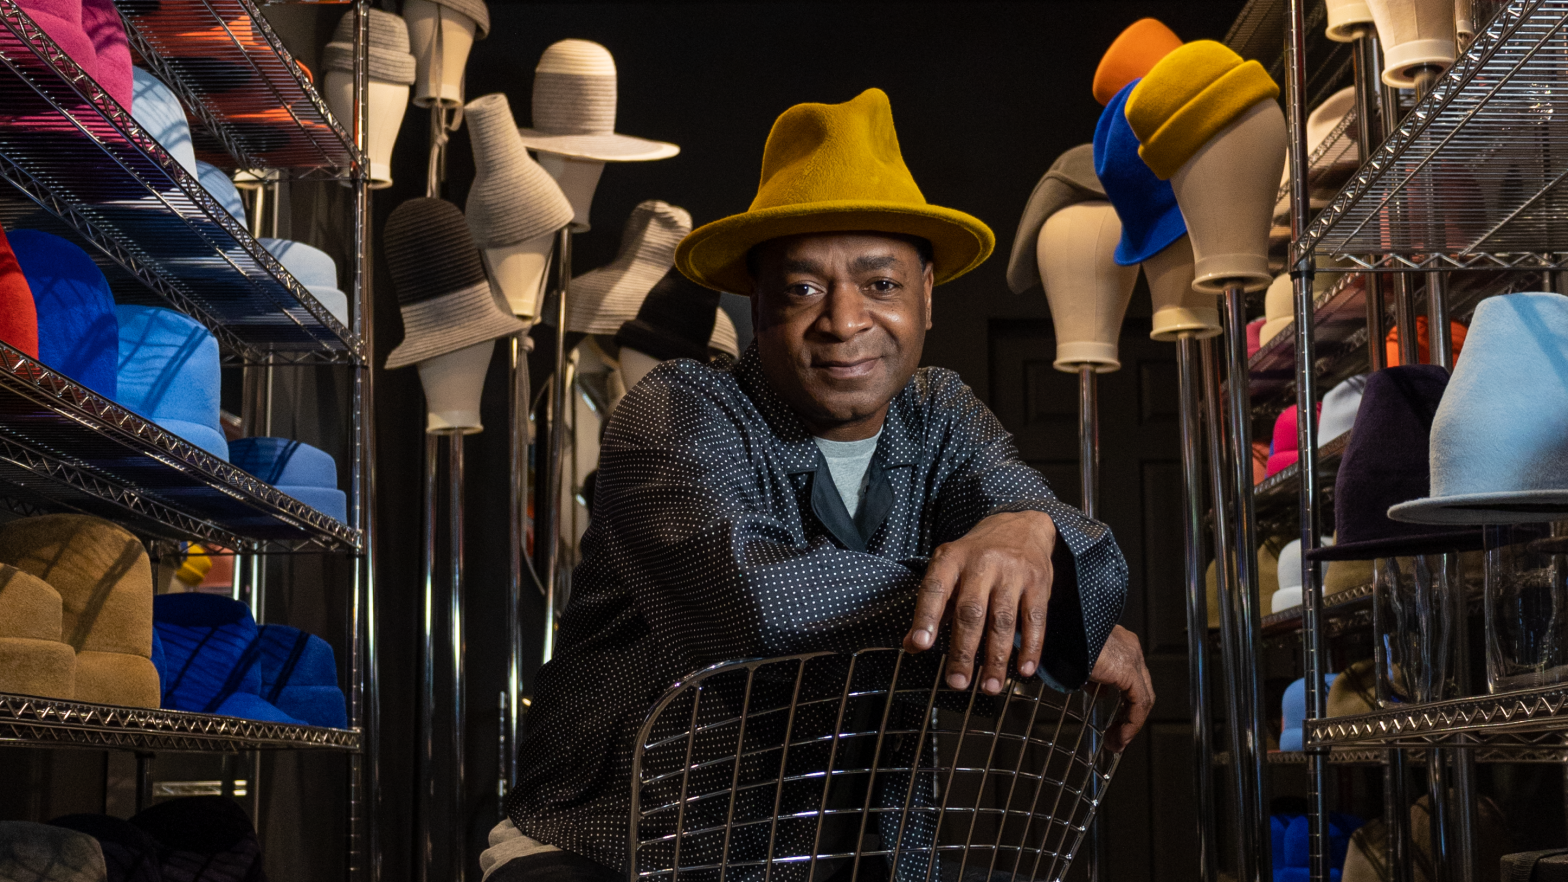 The Designer Behind The Hats That Turn Heads